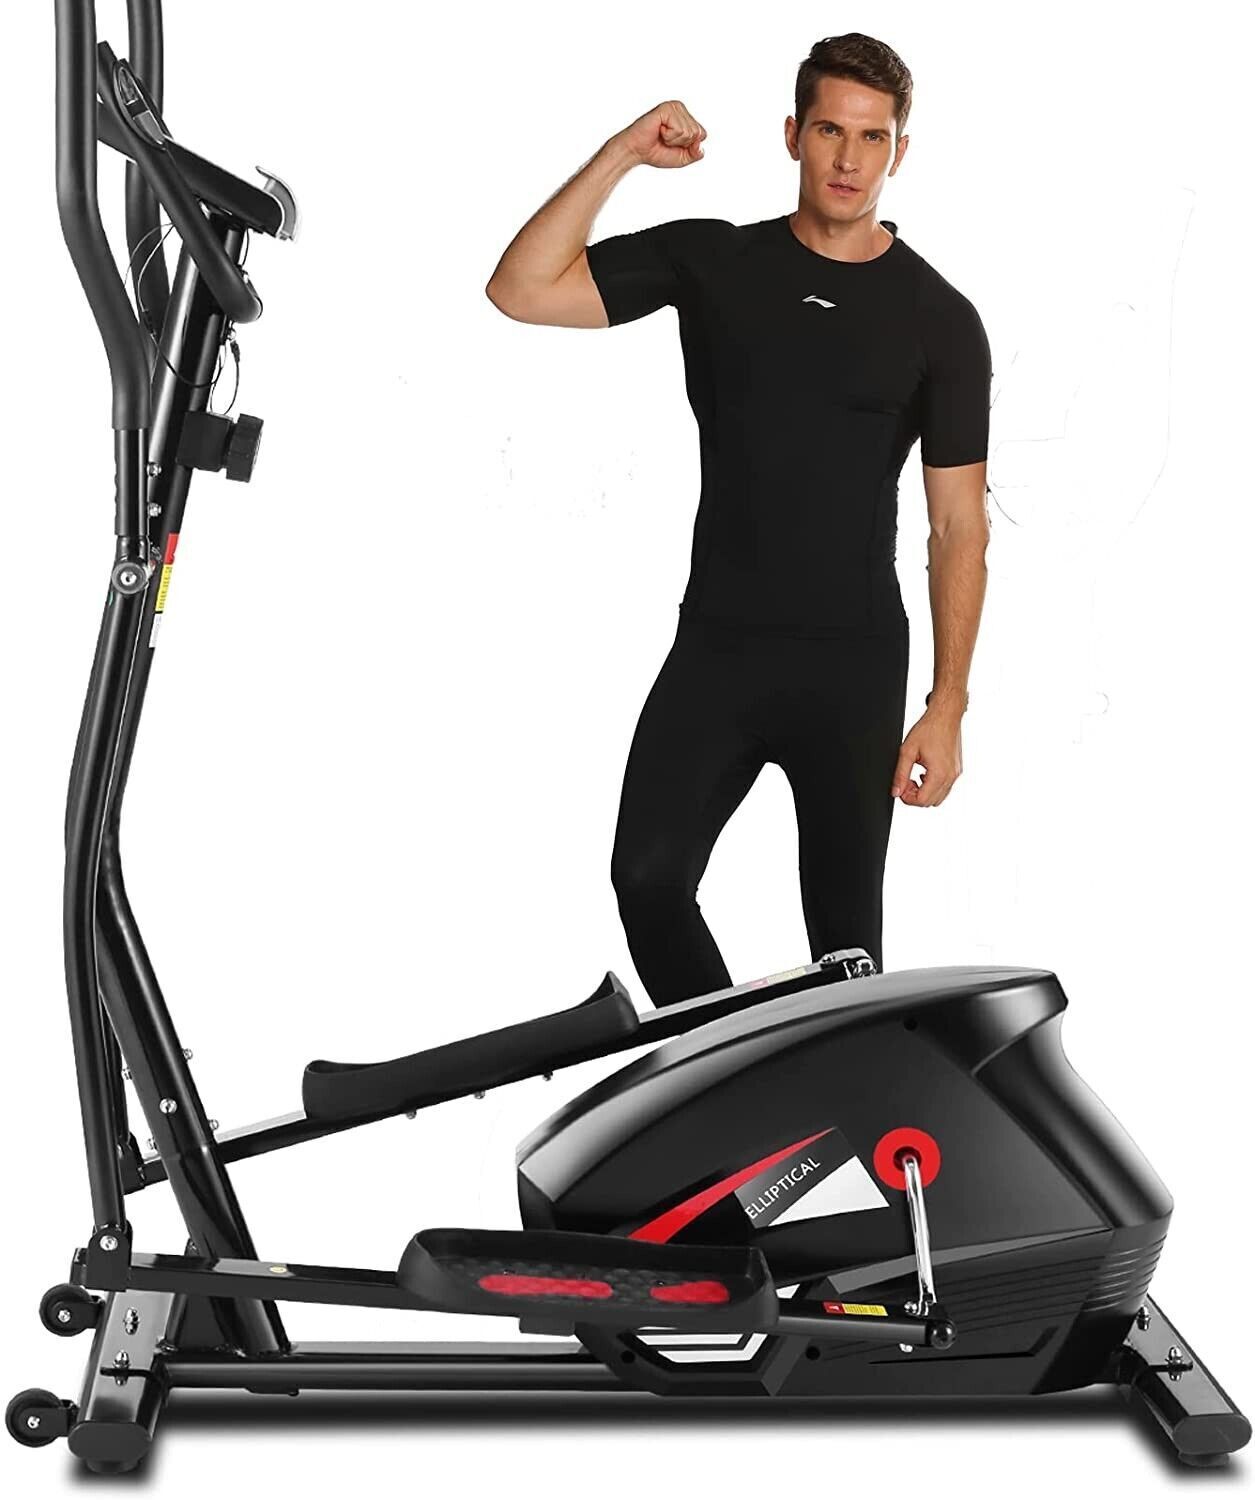 Cardio Fitness Elliptical Cross Trainer for Home Use